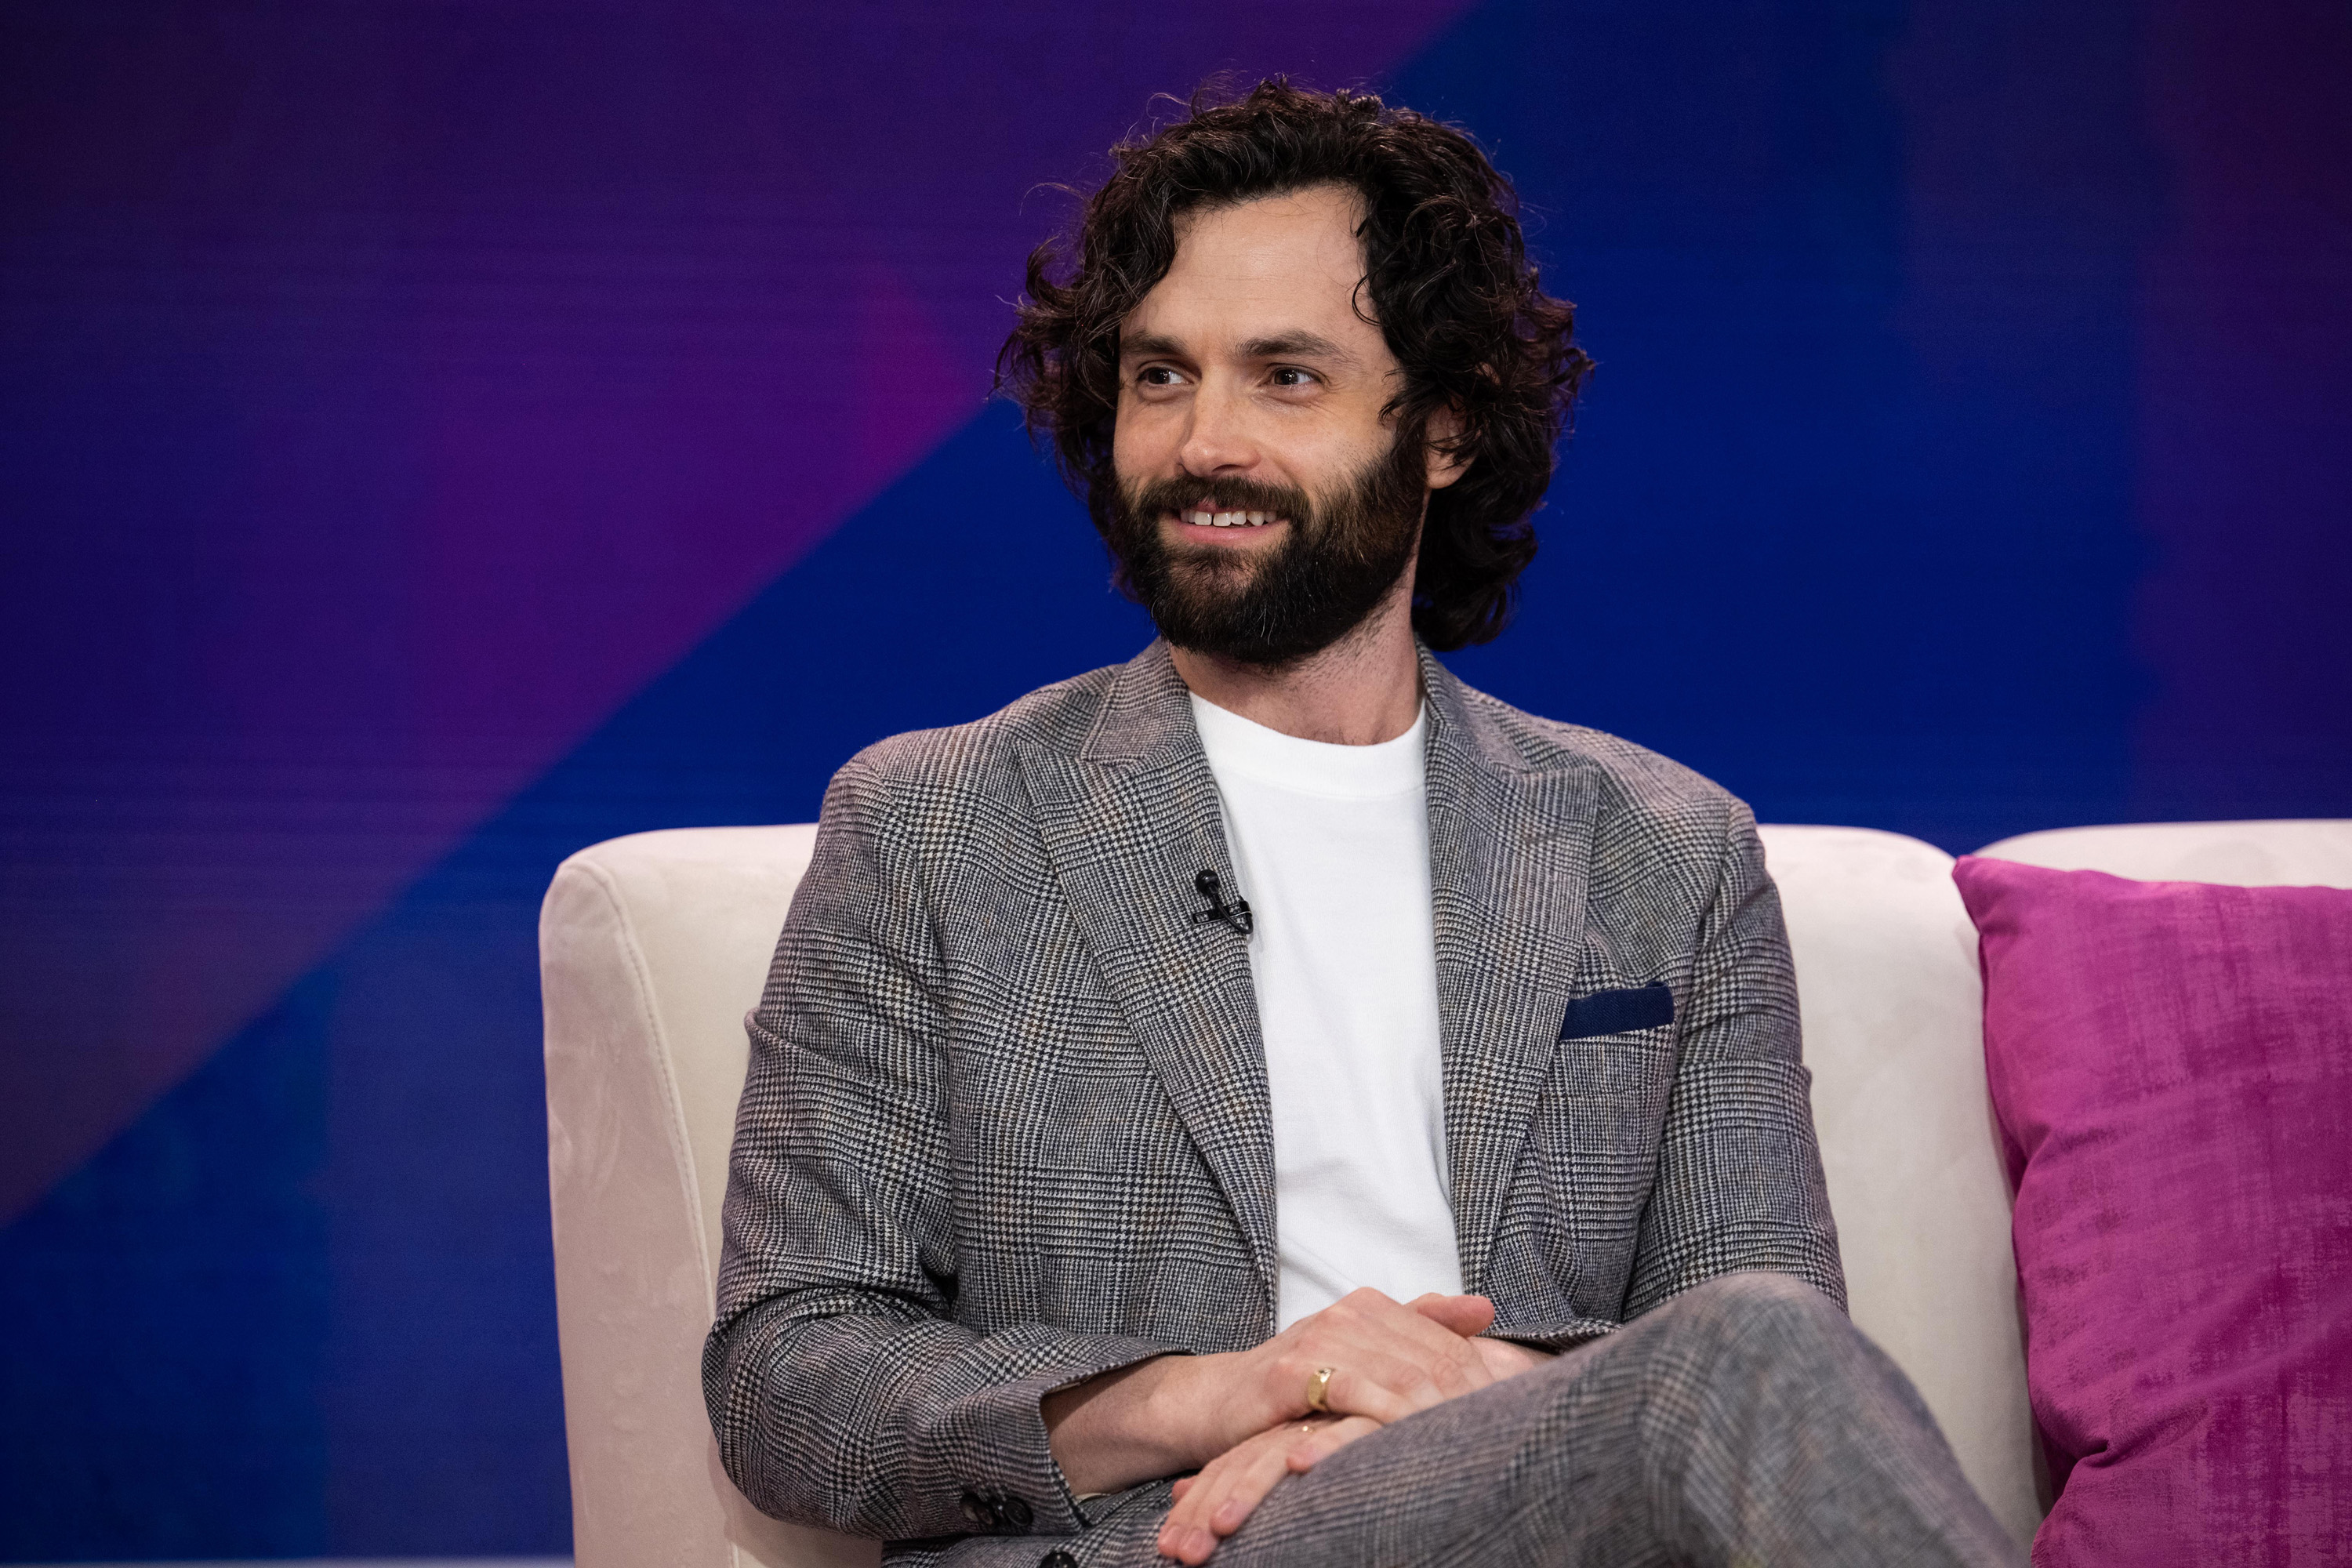 Penn Badgley as a guest for NBC's "Today" on March 15, 2023. | Source: Getty Images